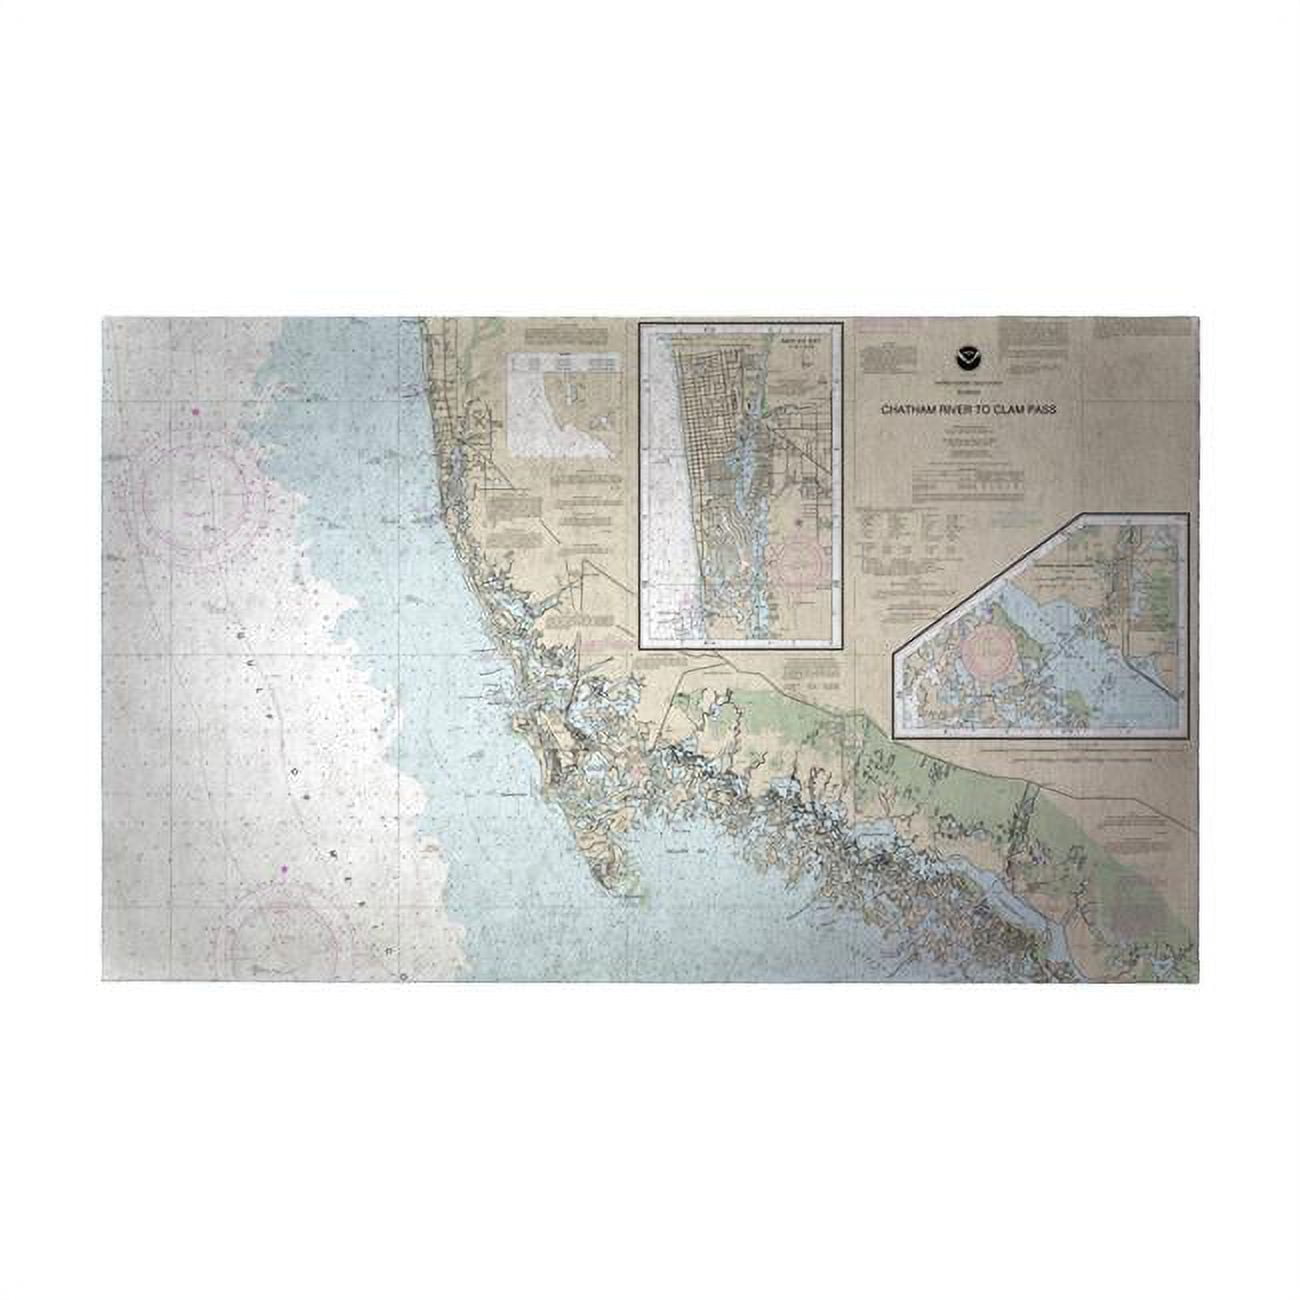 Dm11429namig Naples - Chatham River To Clam Pass, Fl Nautical Map Door Mat - 30 X 50 In.